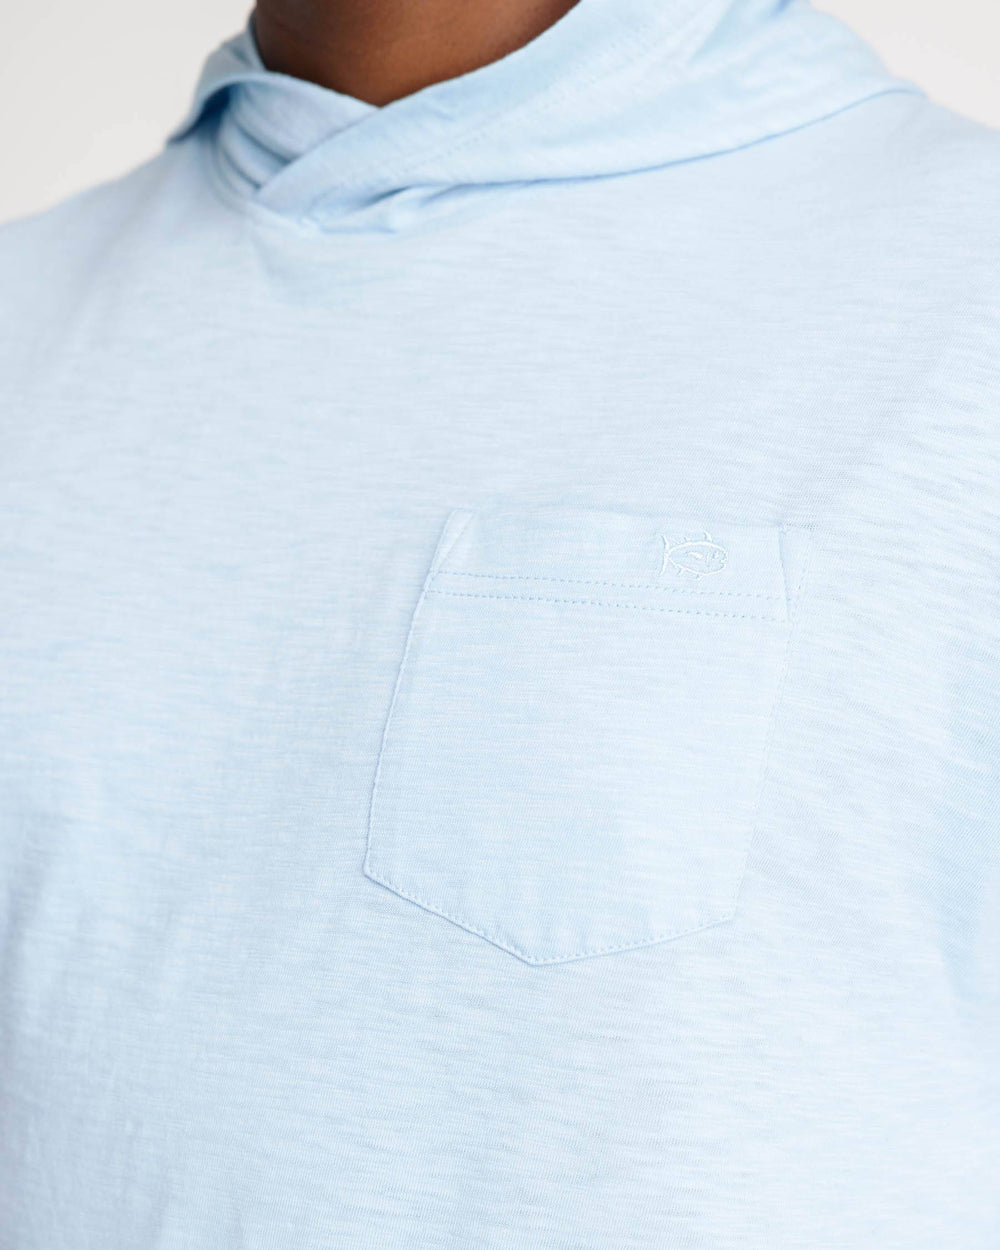 The detail view of the Southern Tide Andreas Sun Farer Hoodie by Southern Tide - Rain Water